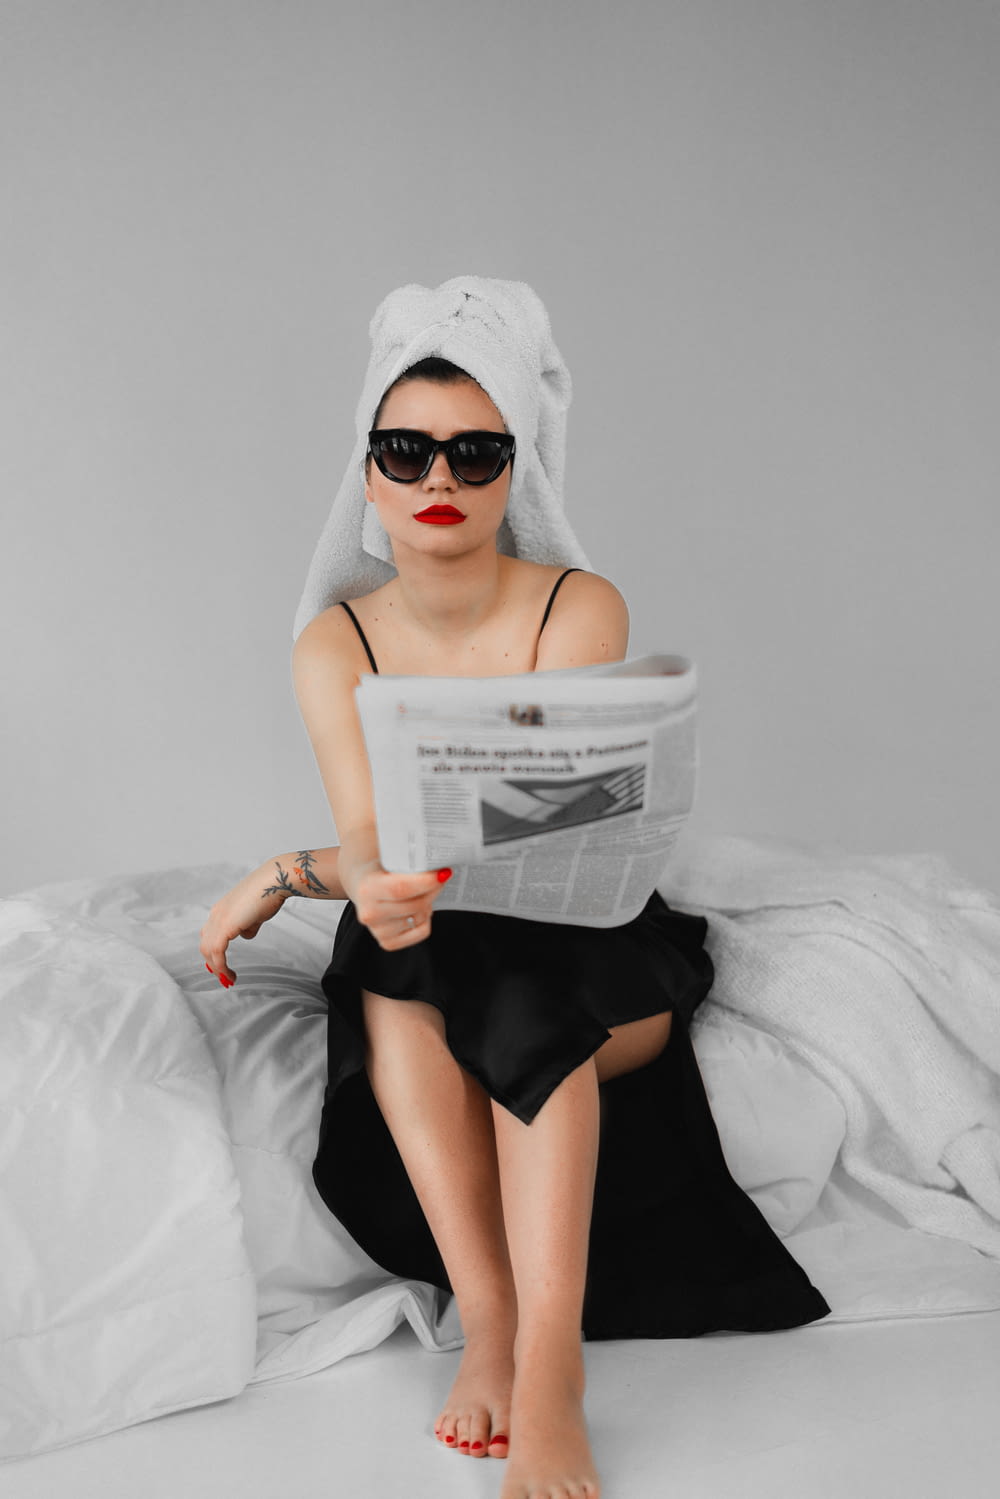 a woman sitting on a bed reading a newspaper